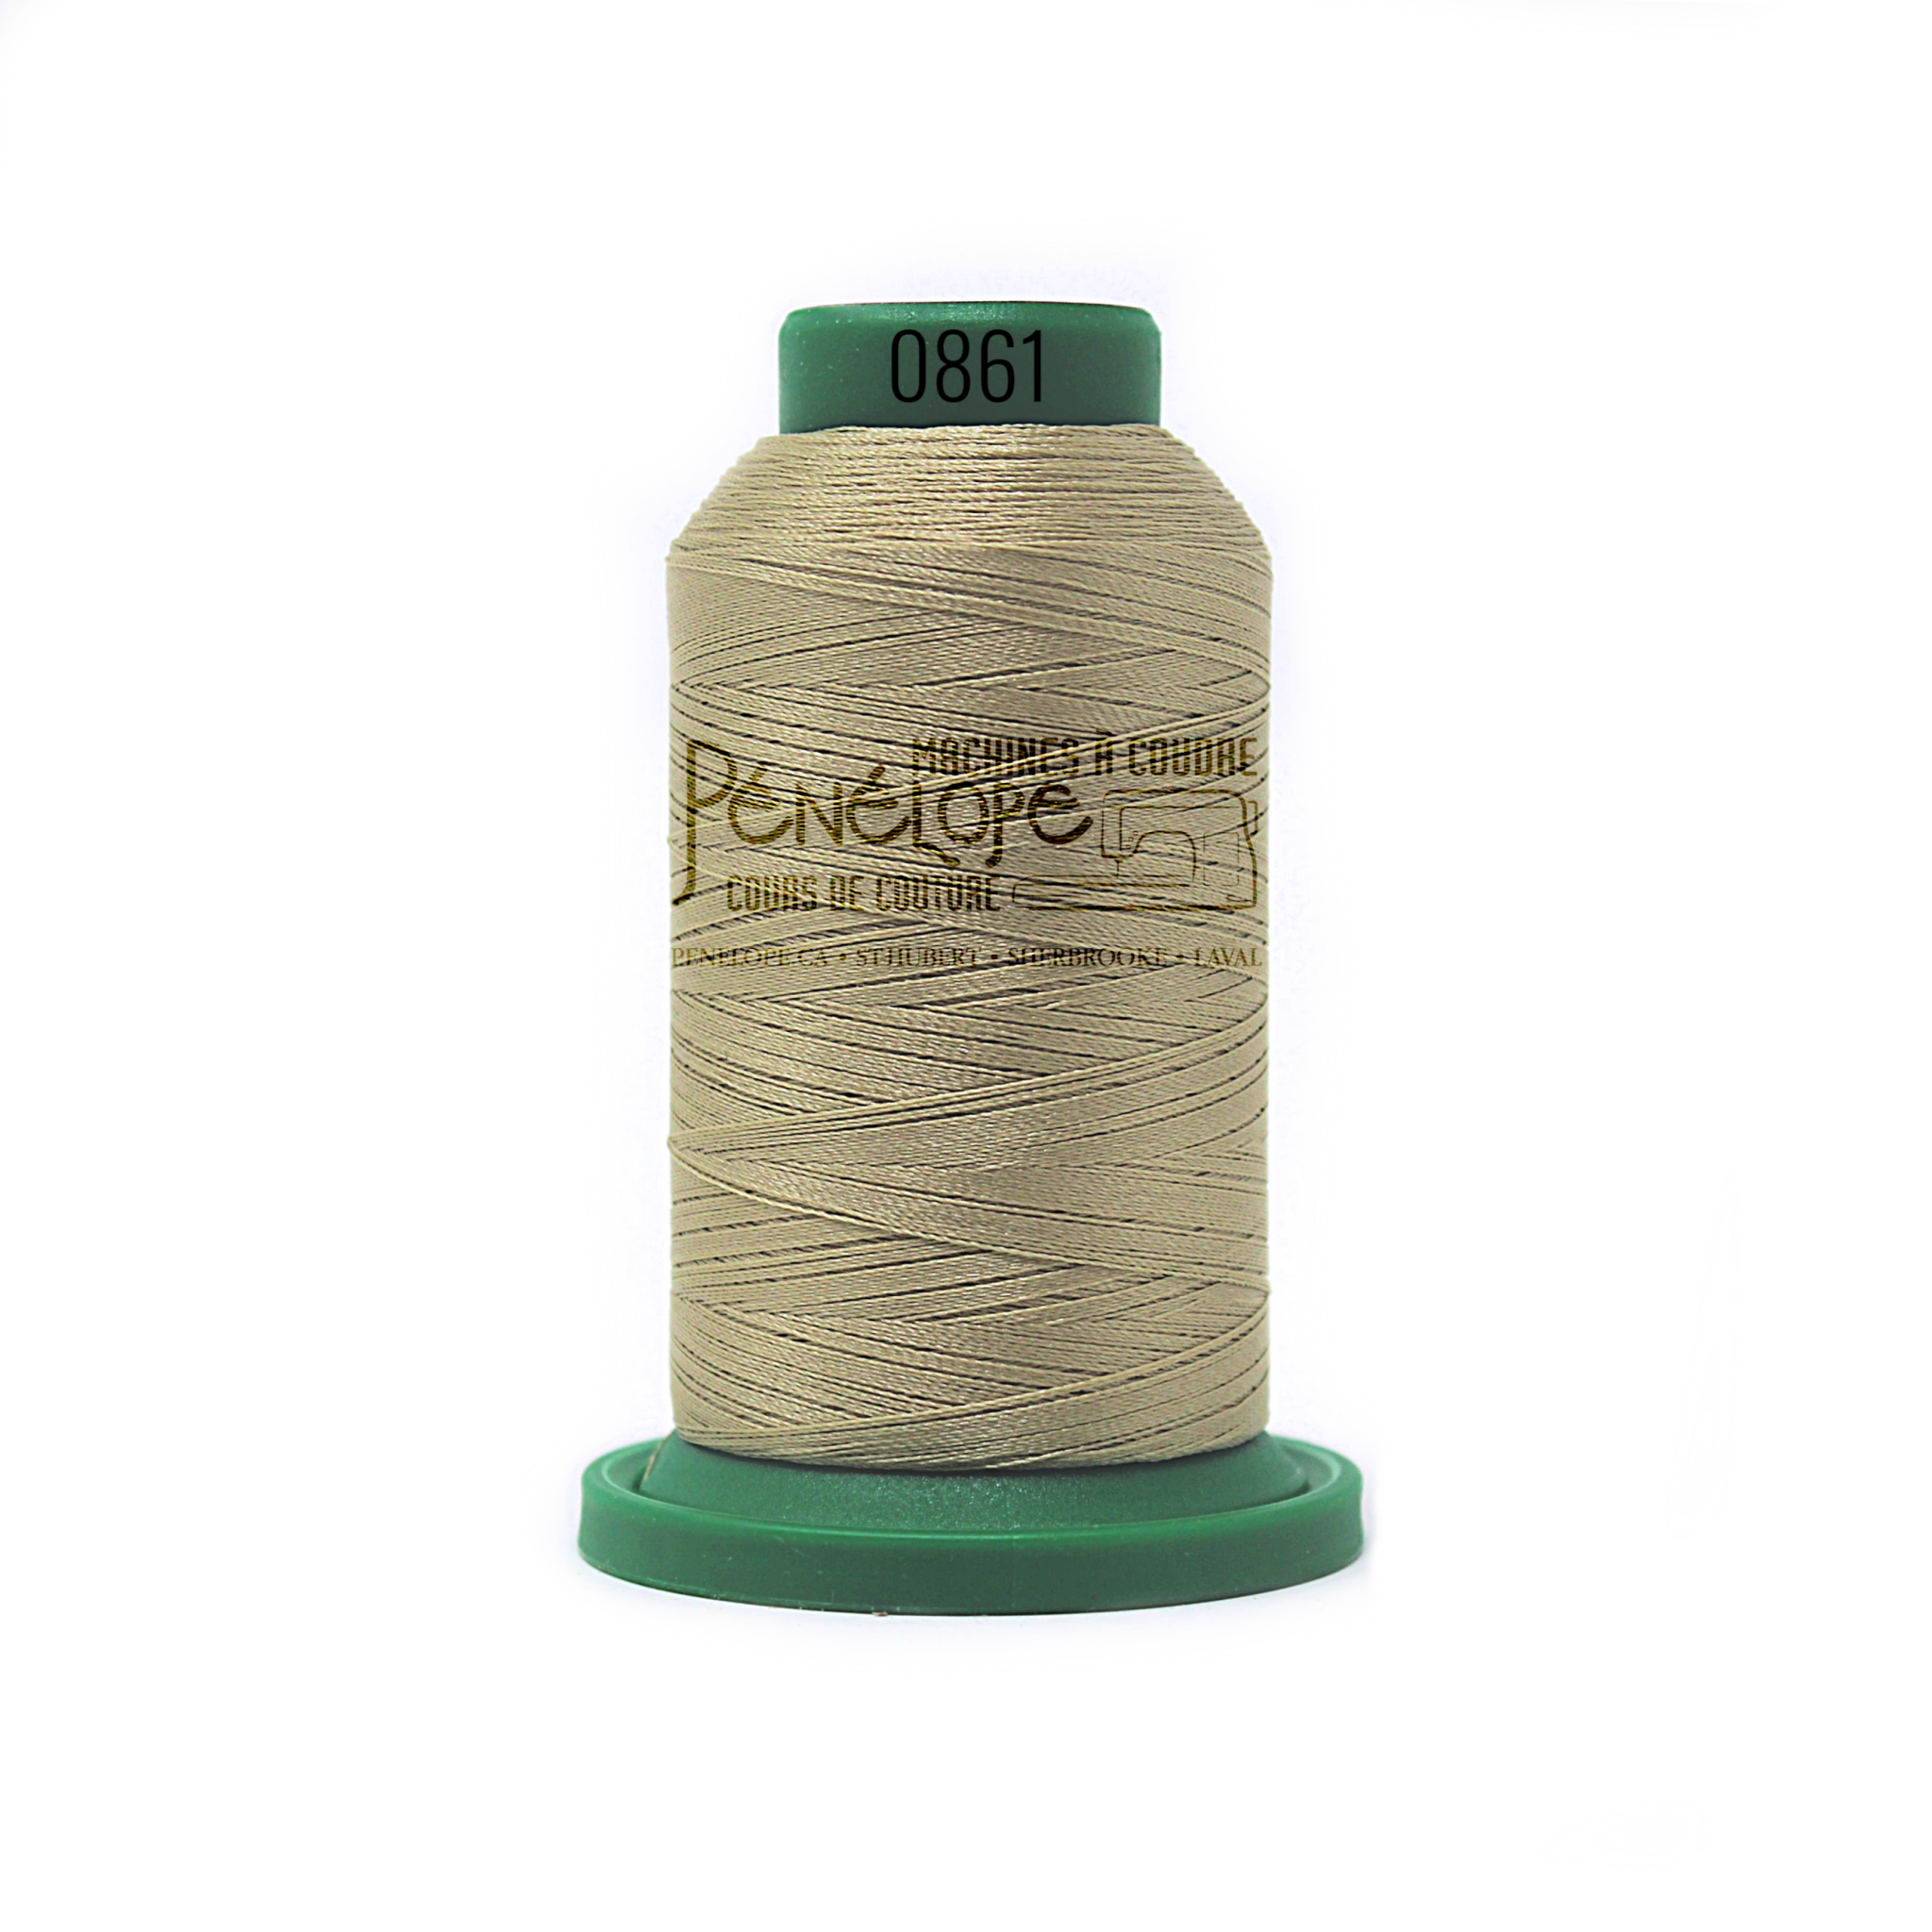 Isacord Isacord sewing and embroidery thread 0861